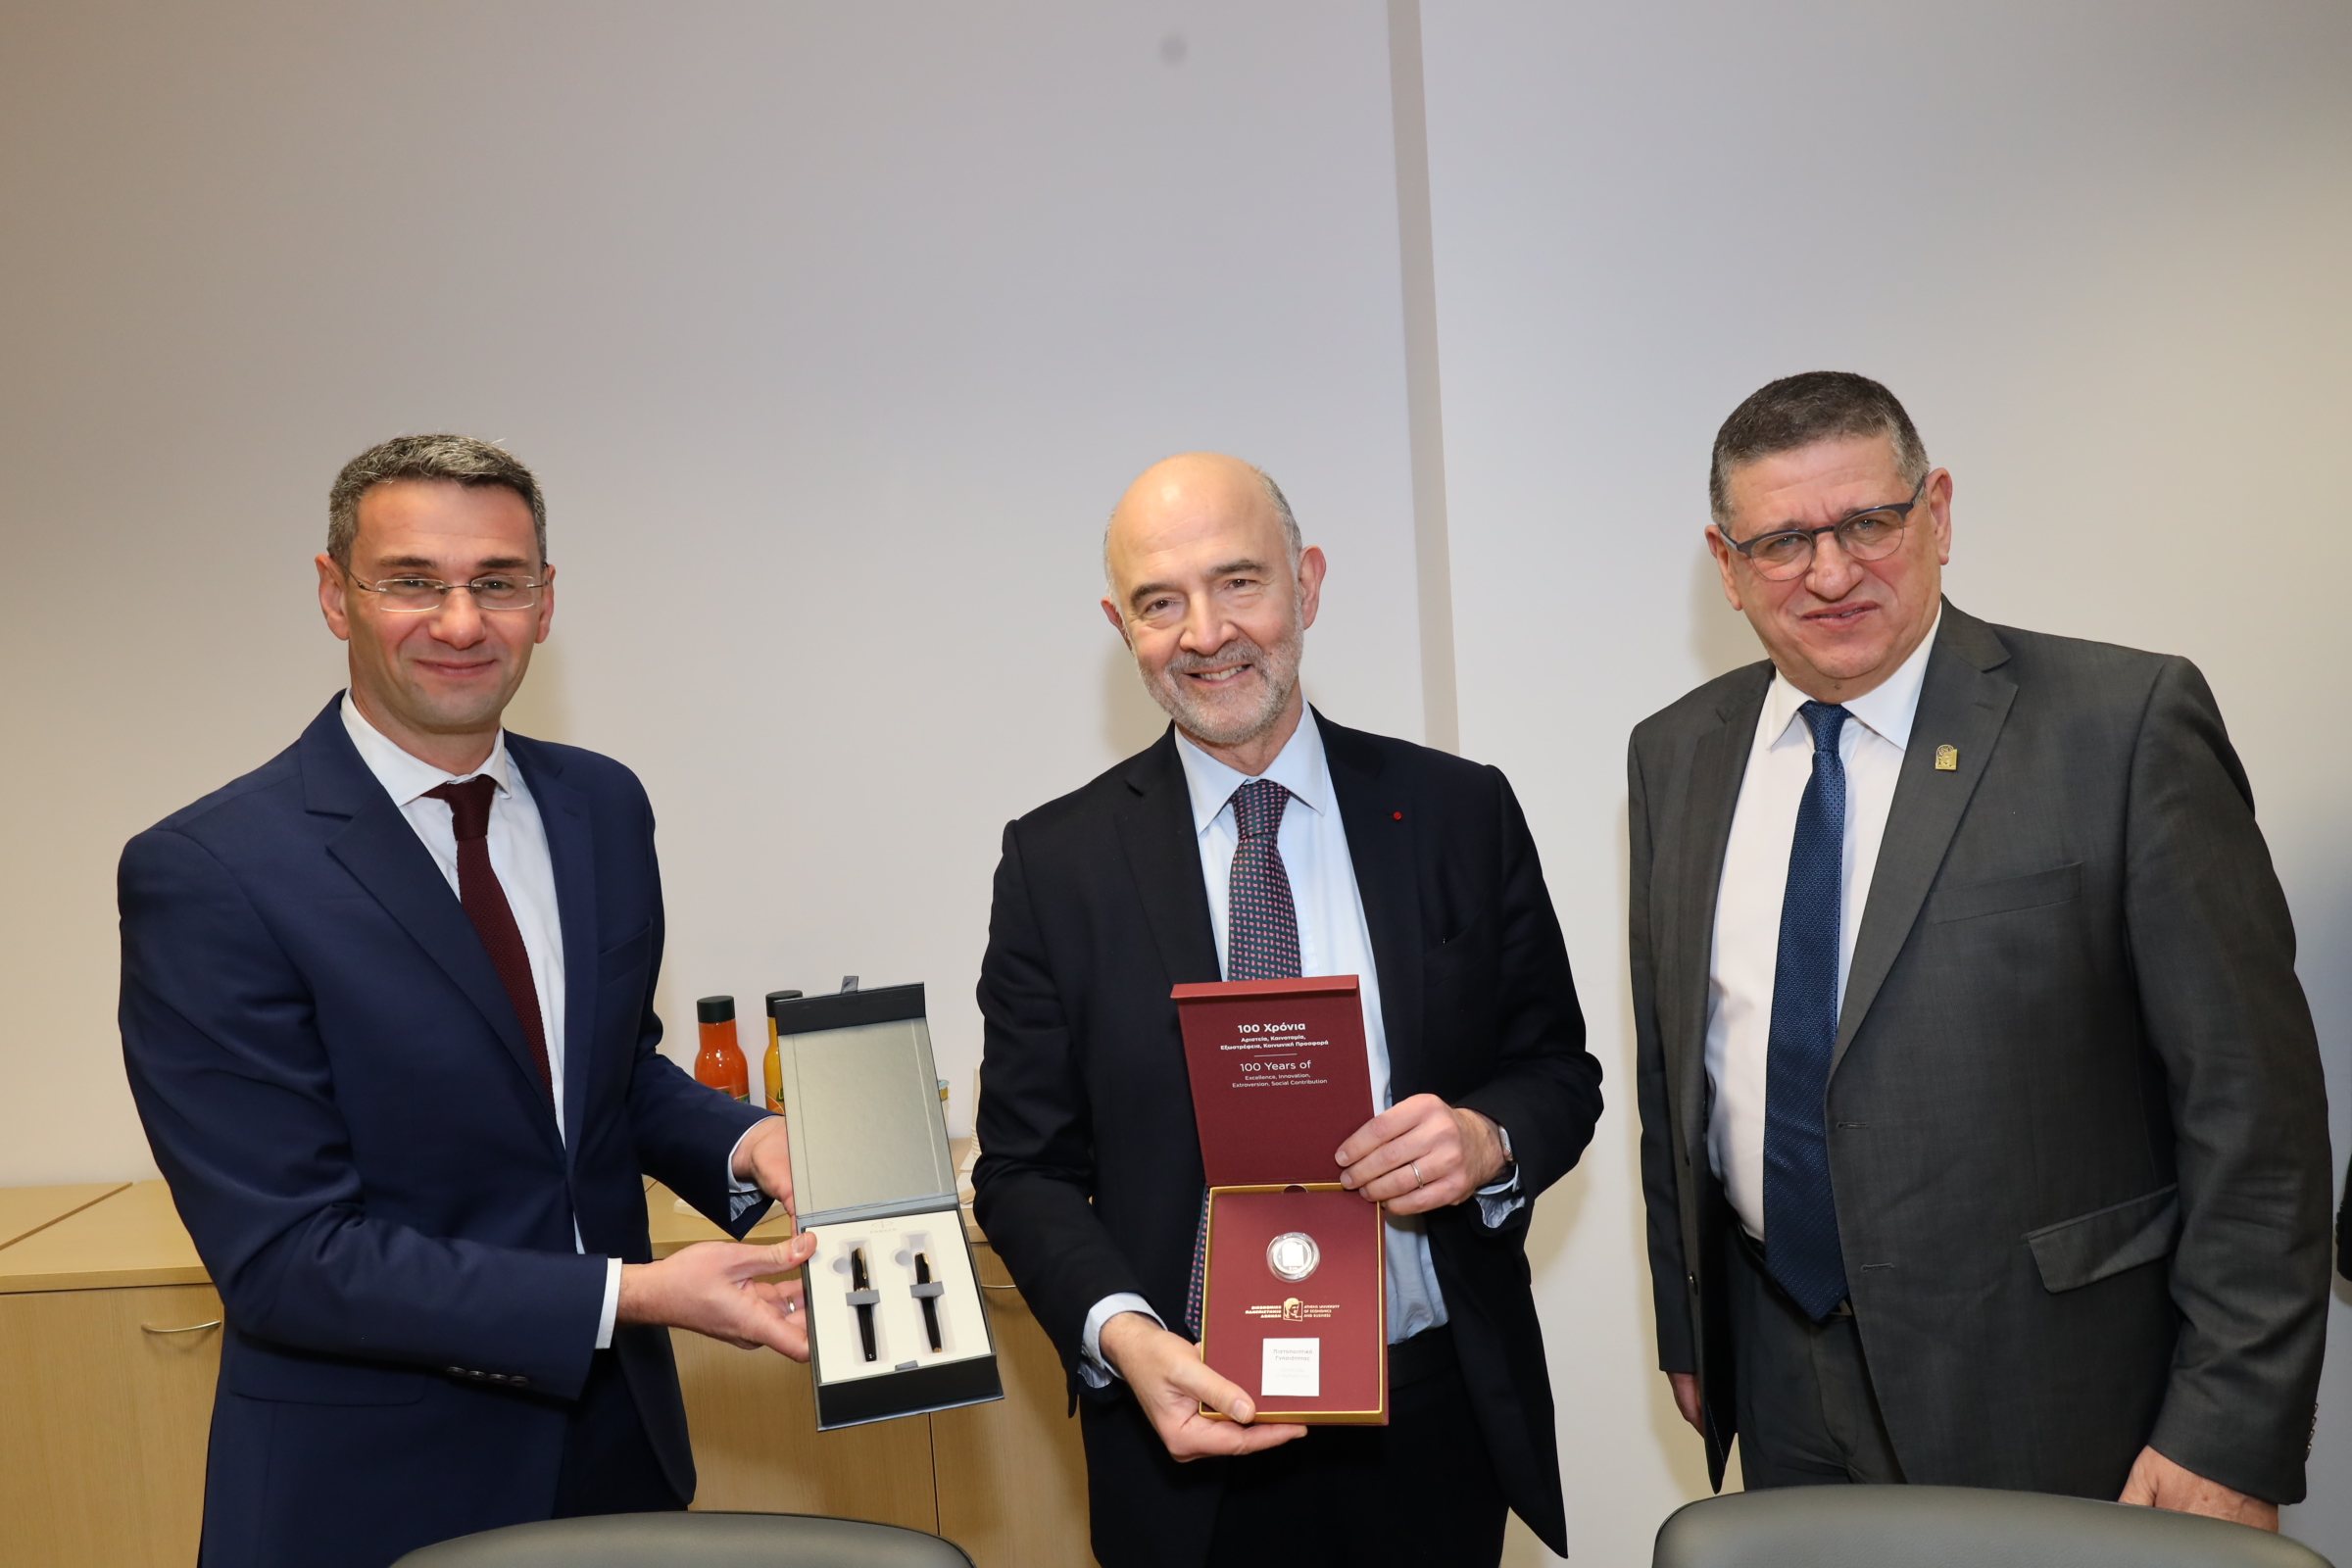 Pierre Moscovici gave a lecture to the students of AUEB